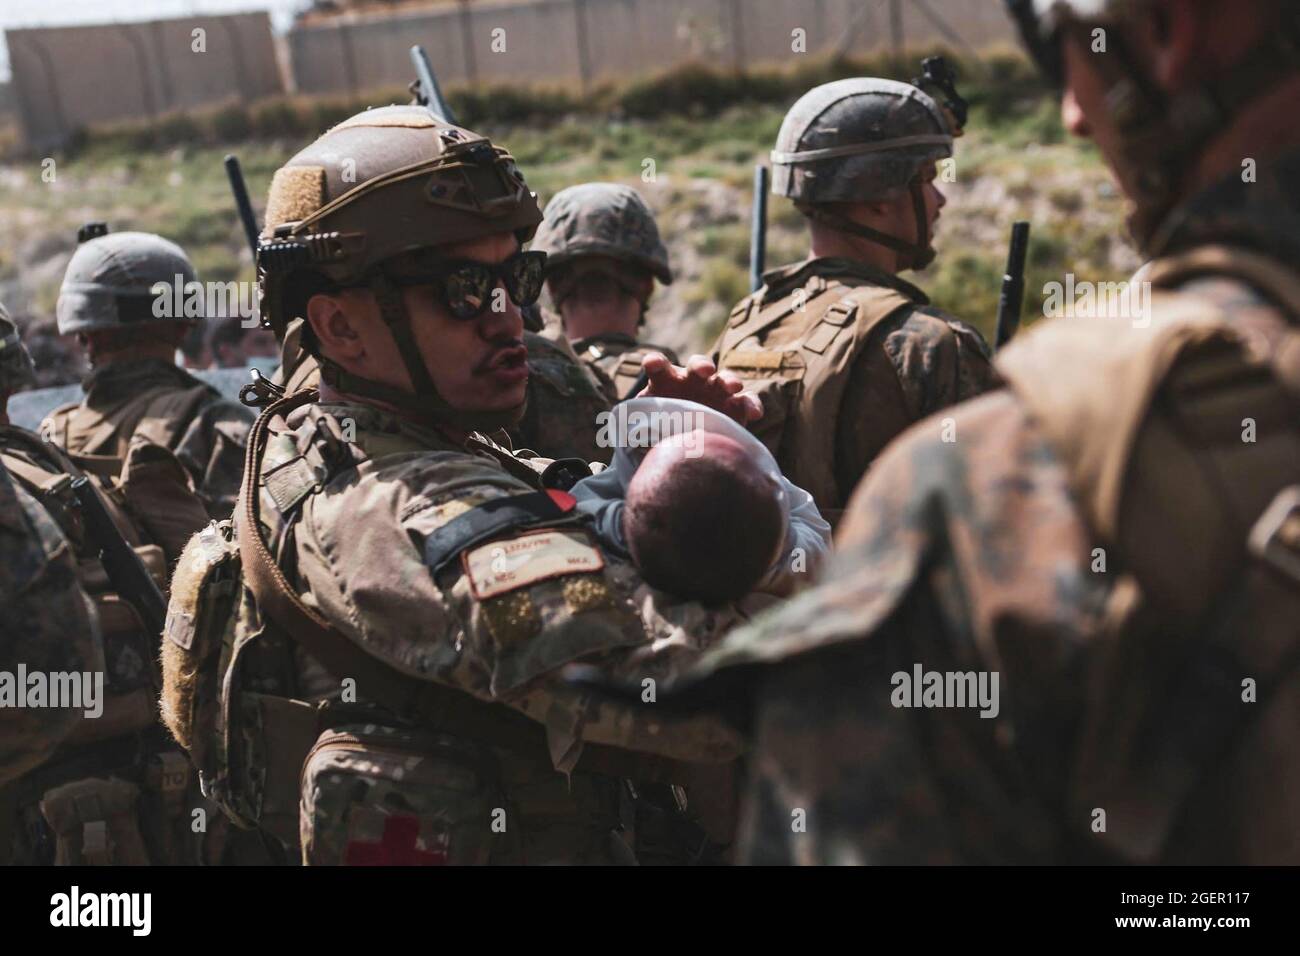 Kabul, Afghanistan. 20th Aug, 2021. A US soldier calms an infant during an evacuation at Hamid Karzai International Airport, Kabul, Afghanistan, on August 20, 2021, in the days following the fall of Kabul to Taliban movement, amid chaos and panic scenes at the capitalâÂ€Â™s airport. Photo by CENTCOM-Balkis Press/ABACAPRESS.COM Credit: Abaca Press/Alamy Live News Stock Photo